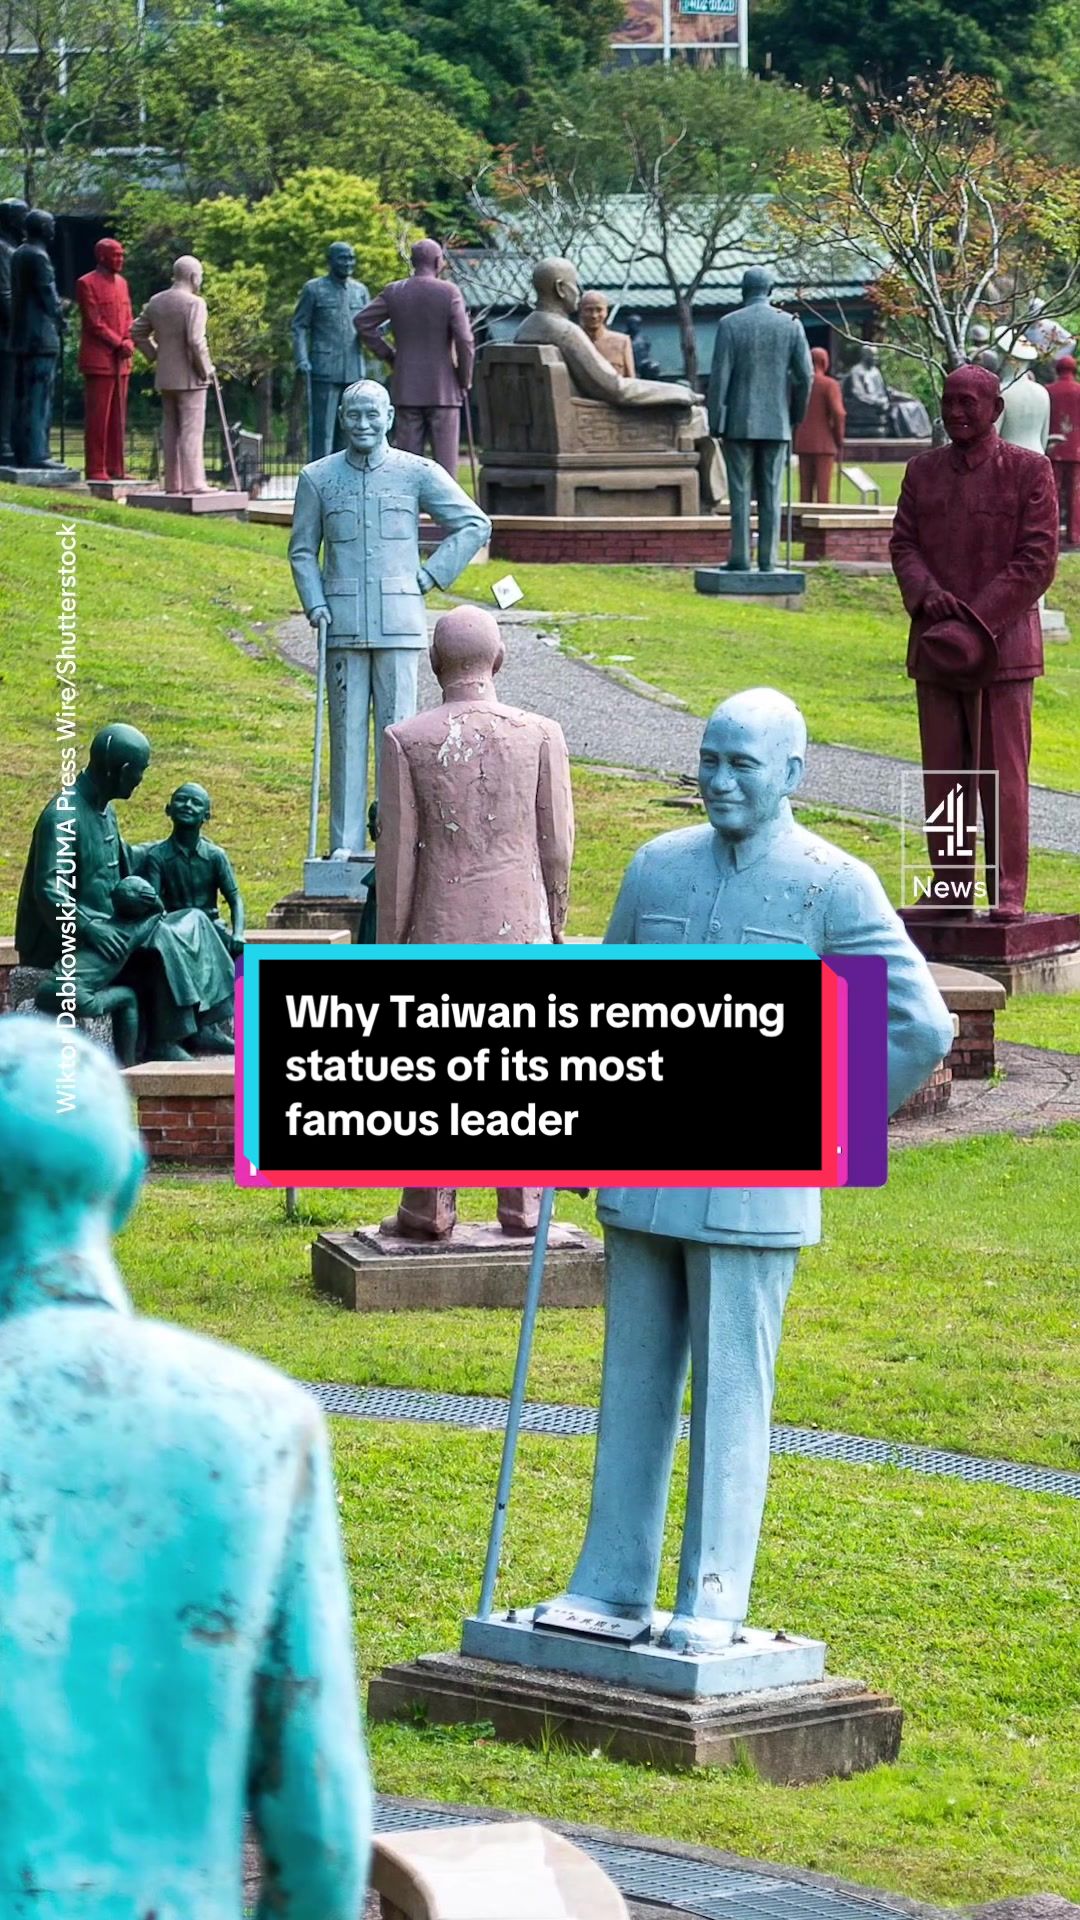 The Taiwanese government is under pressure to remove all statues of its first and longest-serving president Chiang Kai-shek, but why? #Taiwan #ChiangKaishek #China #Channel4News #C4News